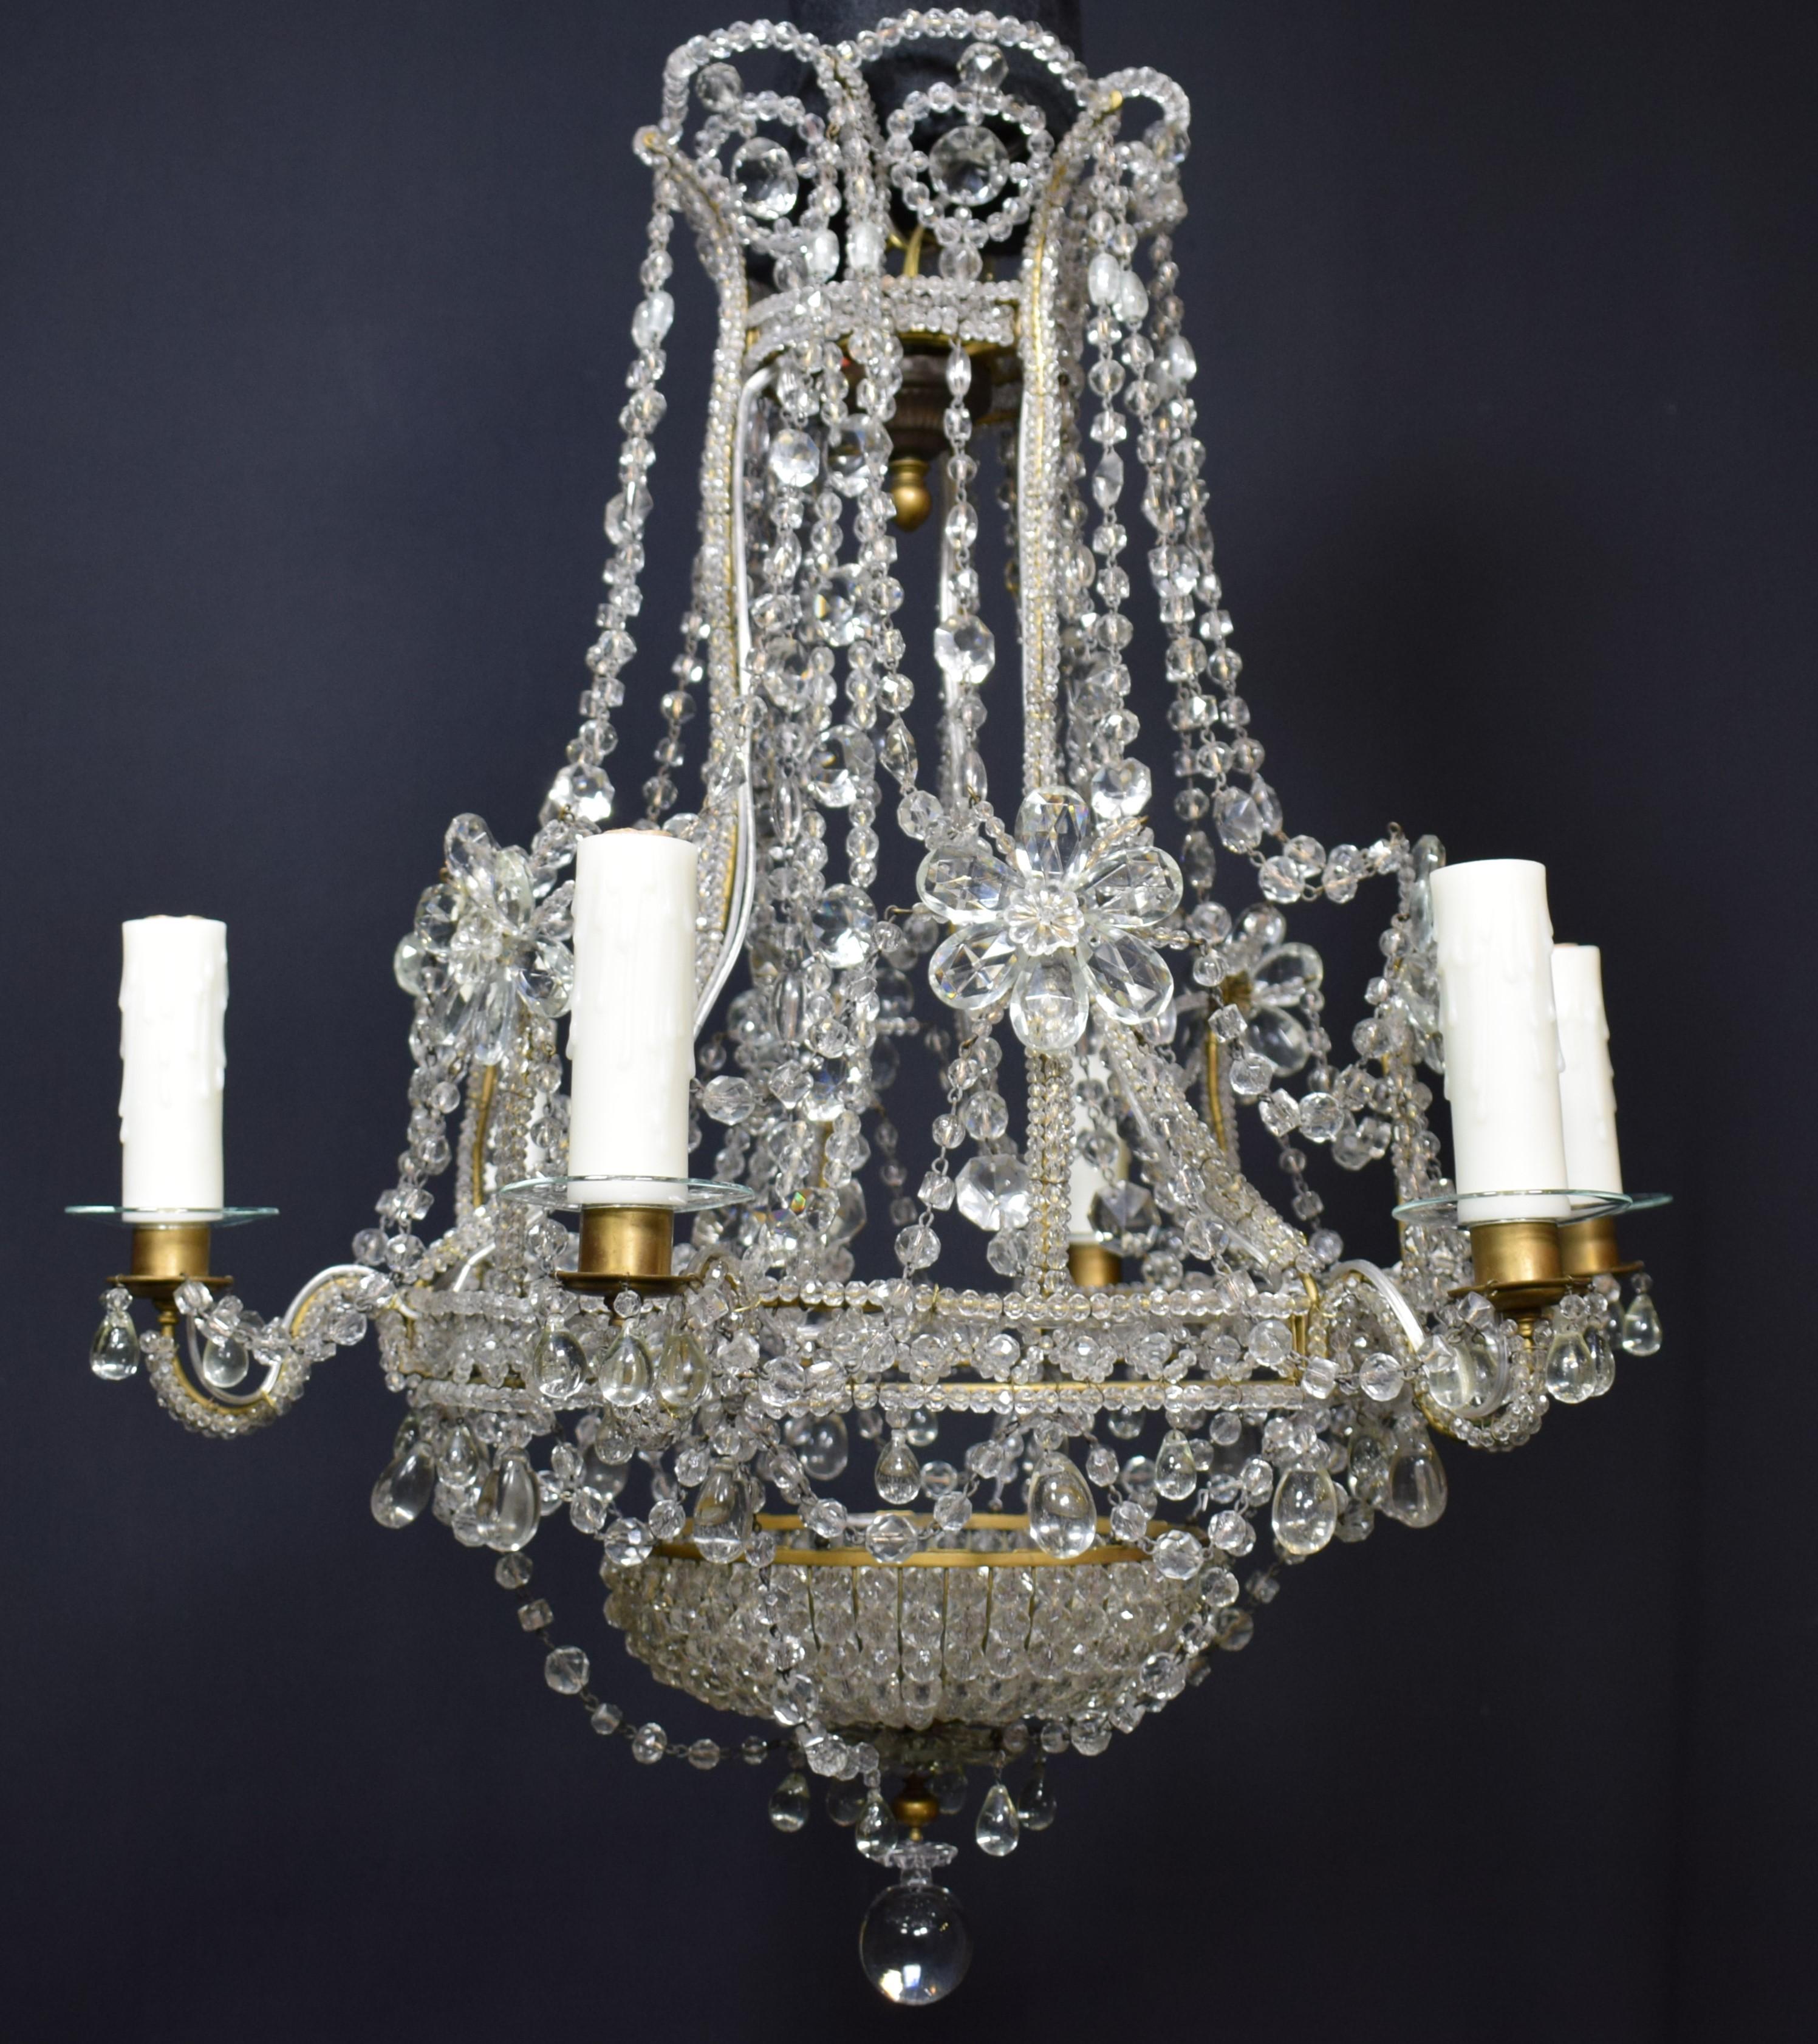 A very fine and decorative Baltic crystal chandelier. Exquisite crystal pinning work.
Sweden, circa 1900. 6 lights. Near pair available. 
Dimensions: height 27 x diameter 24.
CW4587.